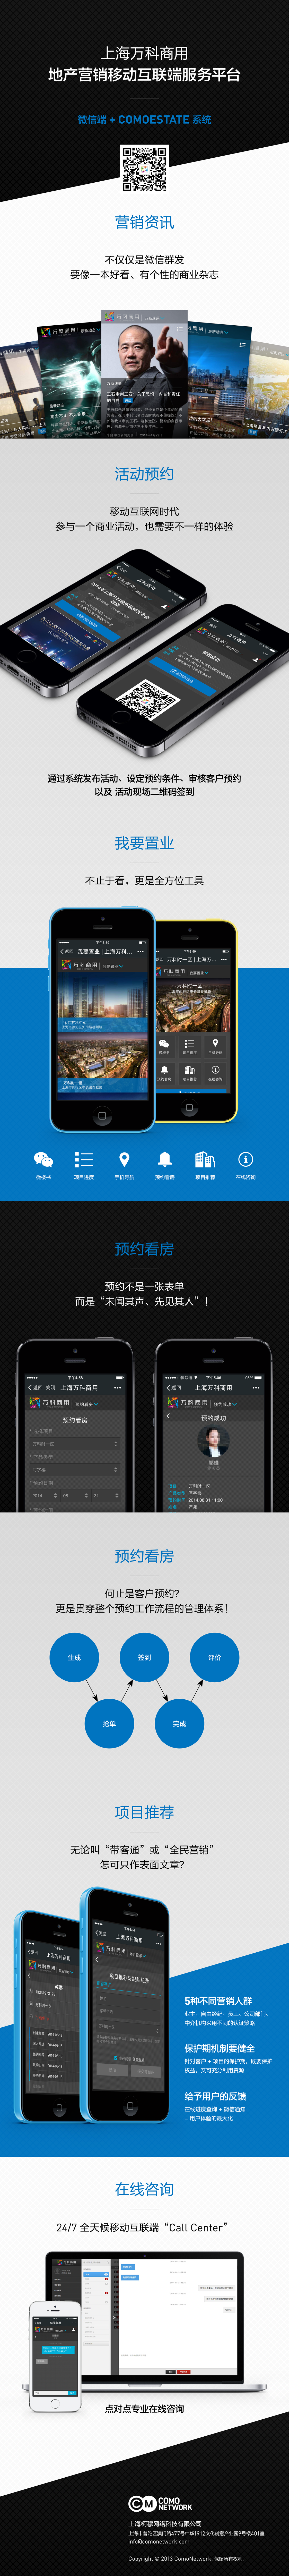 real estate mobile wechat CRM html5